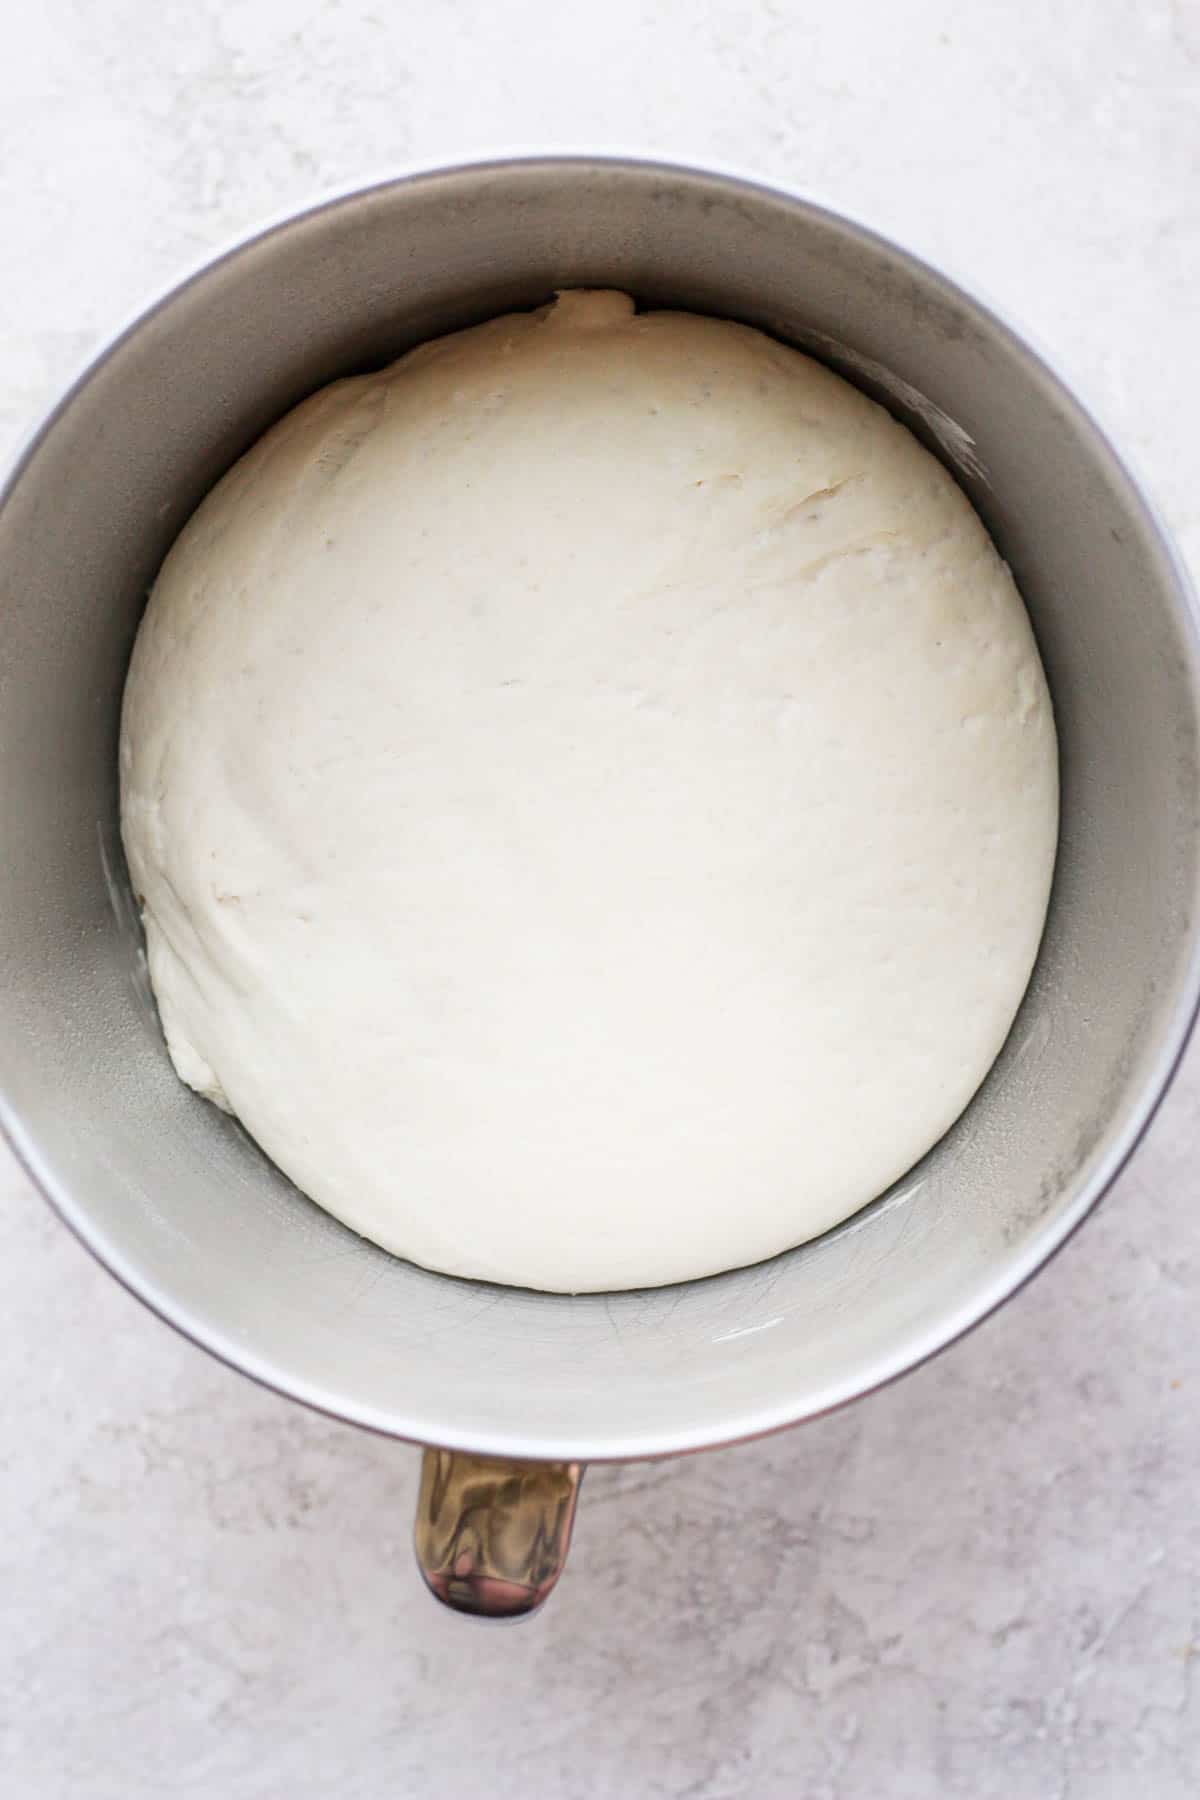 Pizza dough after doubling in size in a bowl.